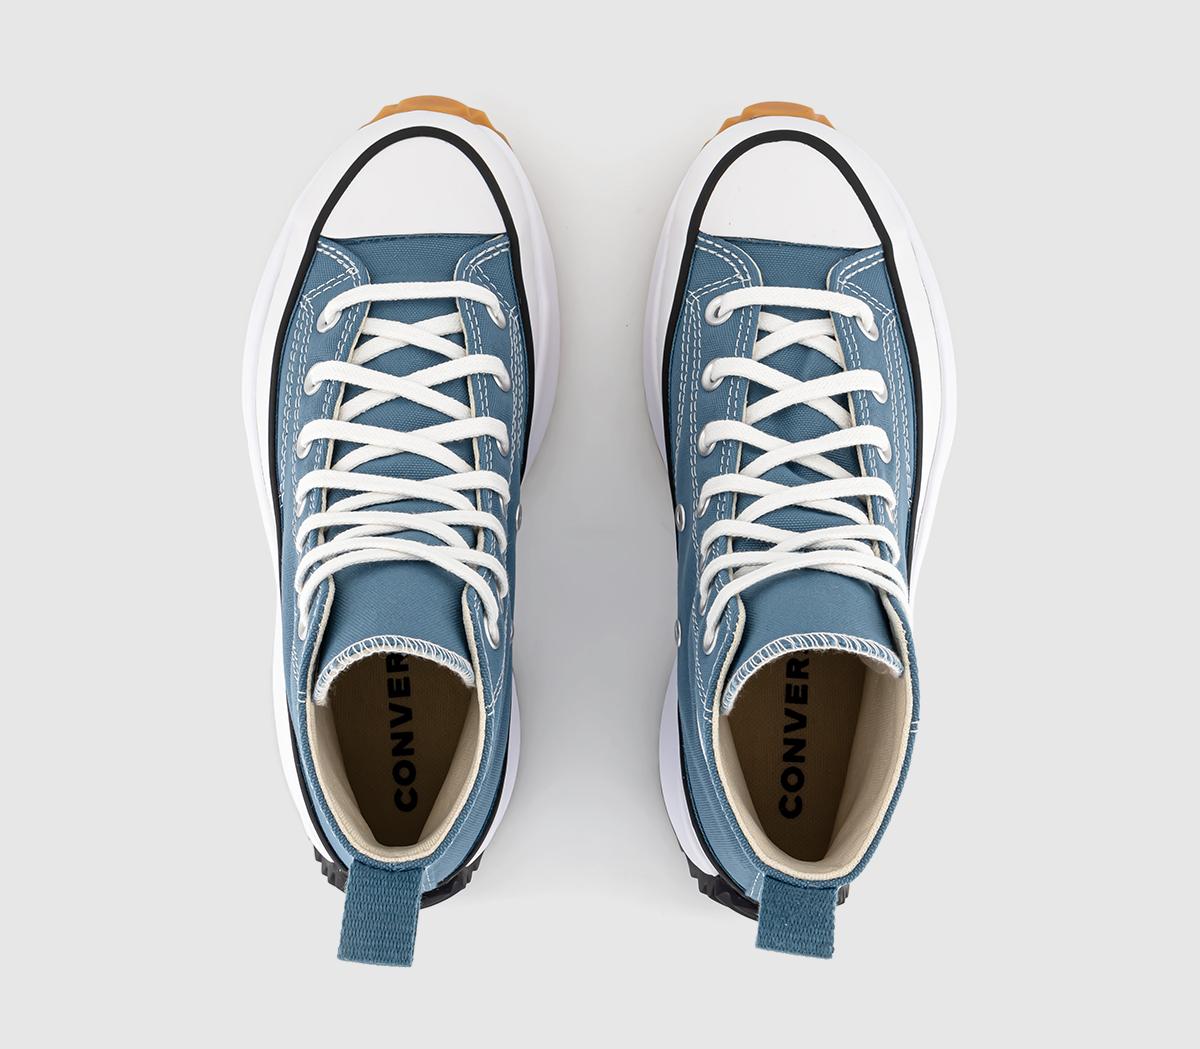 Converse Run Star Hike Trainers Noble Blue White Black - Women's Trainers